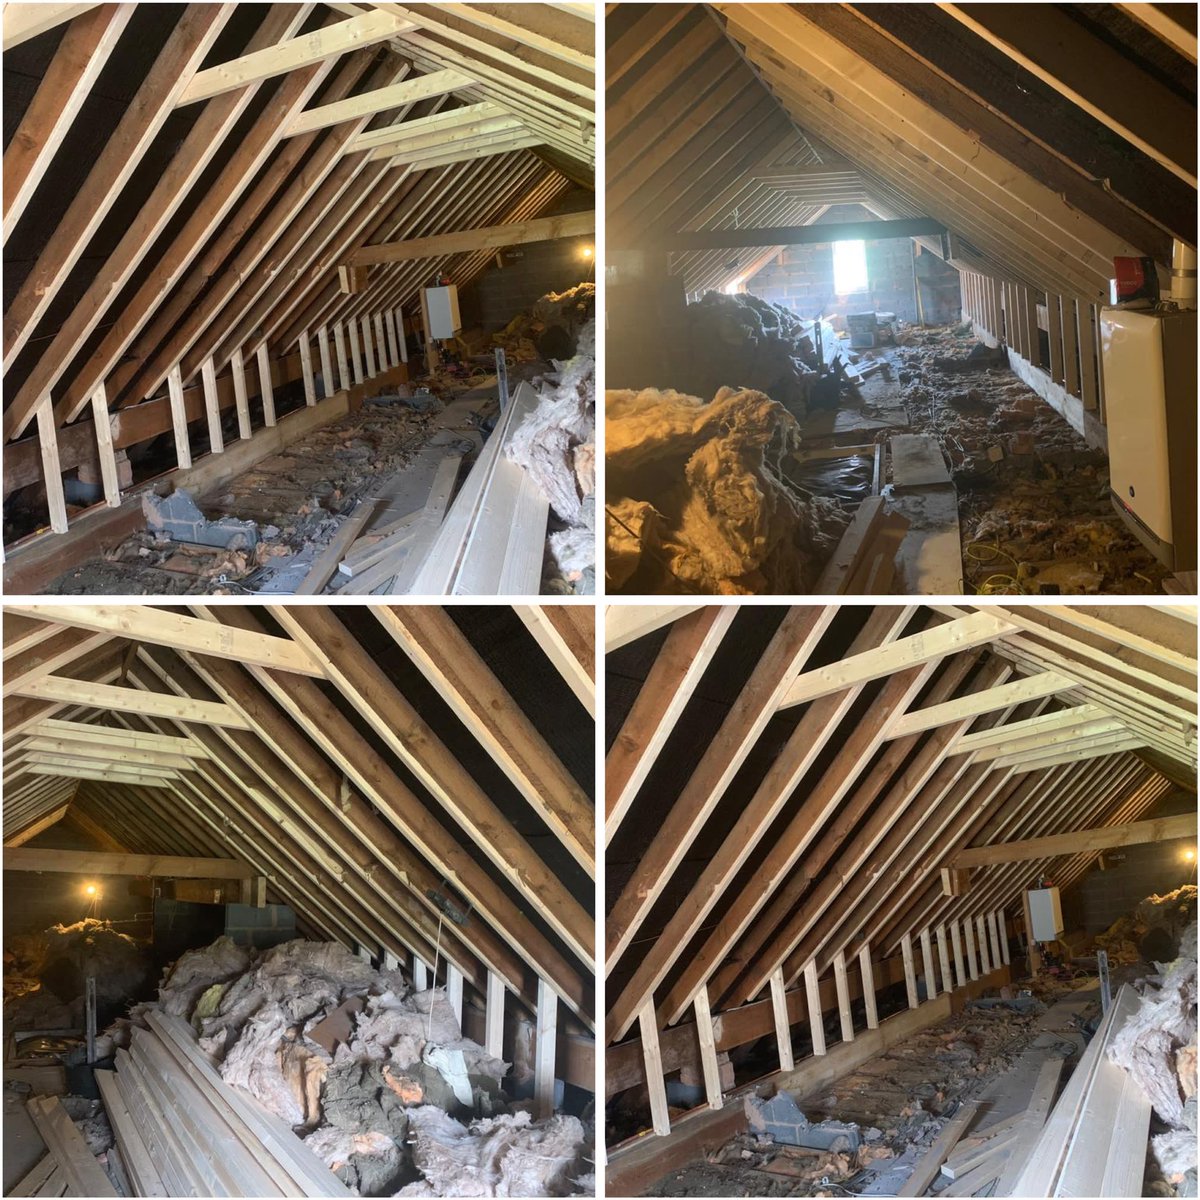 Look at all the space! 
Roof structure complete on this loft conversion for 2 bedrooms and bathroom. Stairs to be fitted today. #loftconversions #a7conversions #loftbedroom #lofts #newbedroom